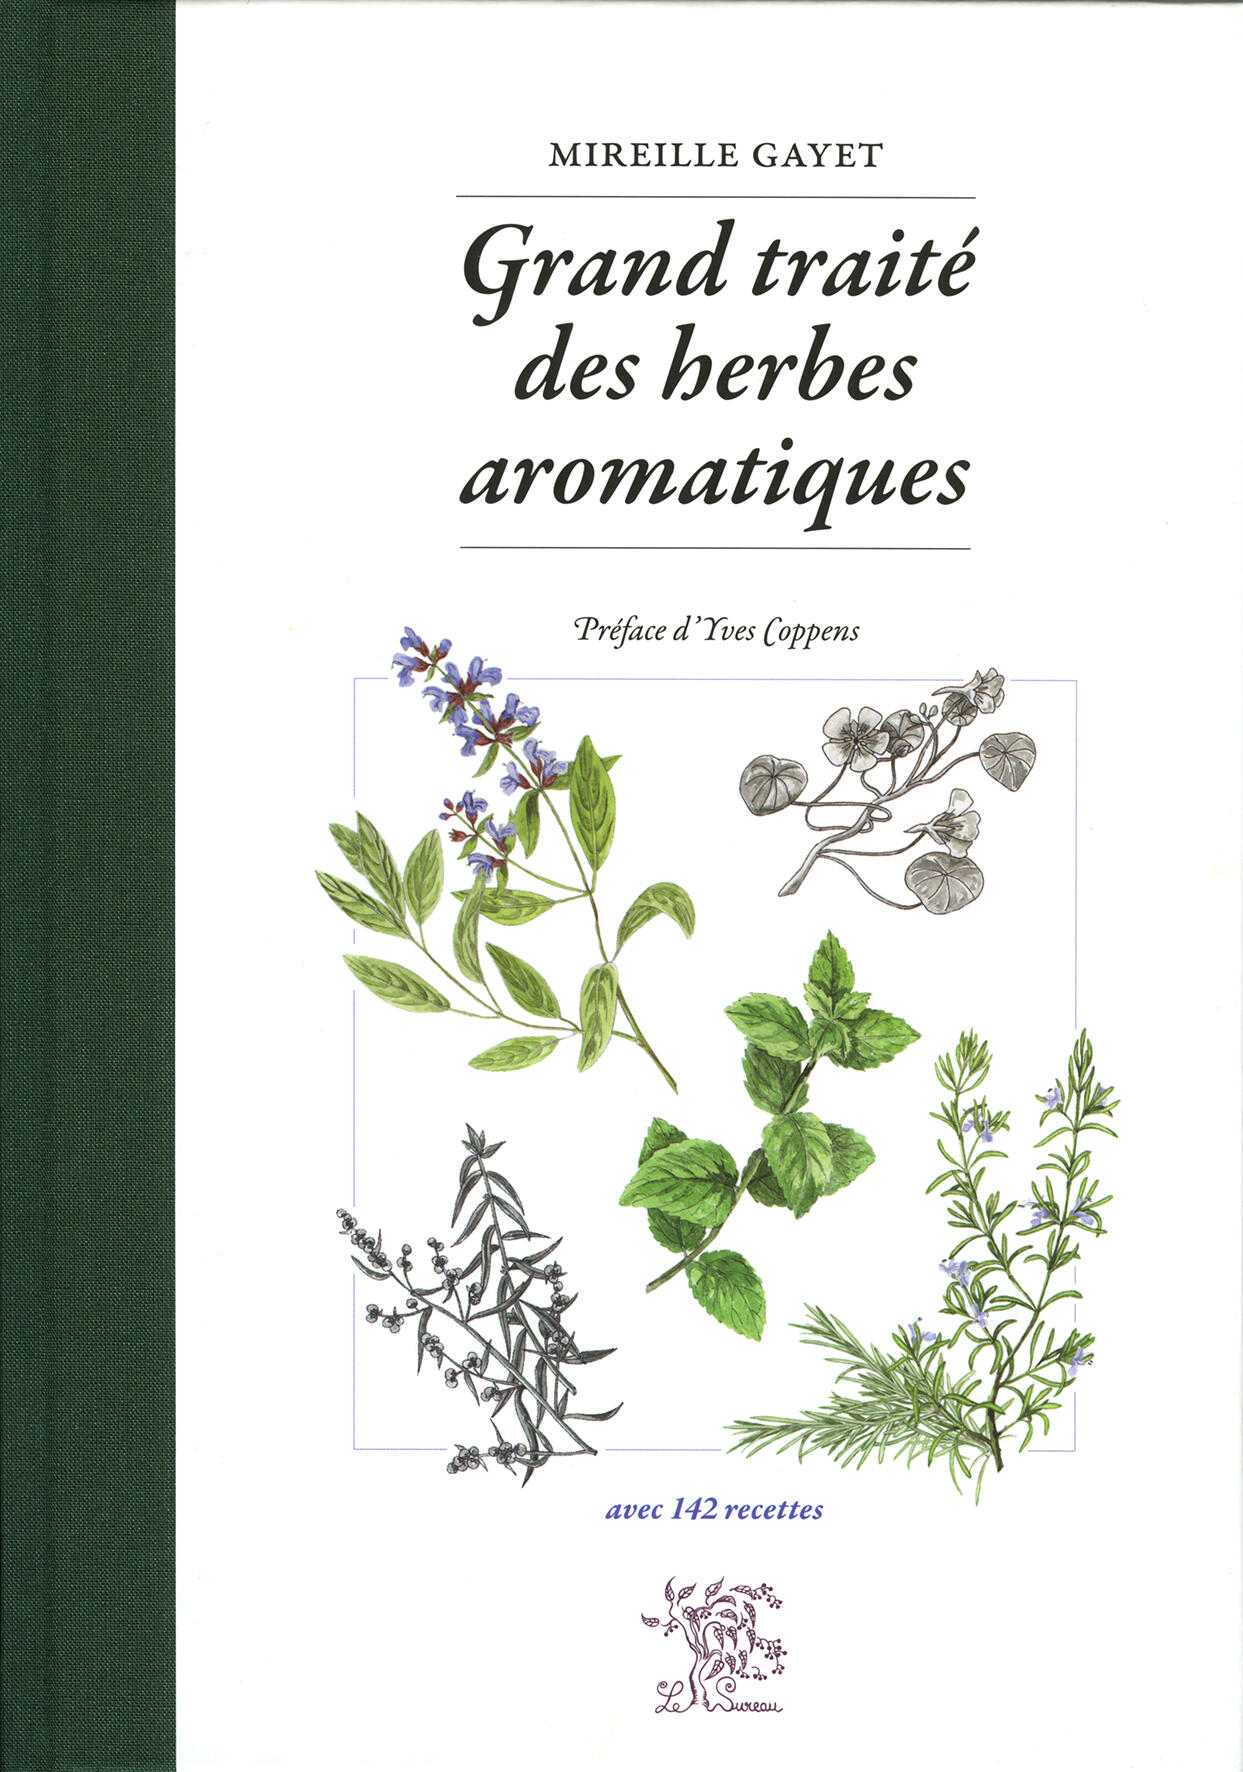 Great treatise of aromatic herbs